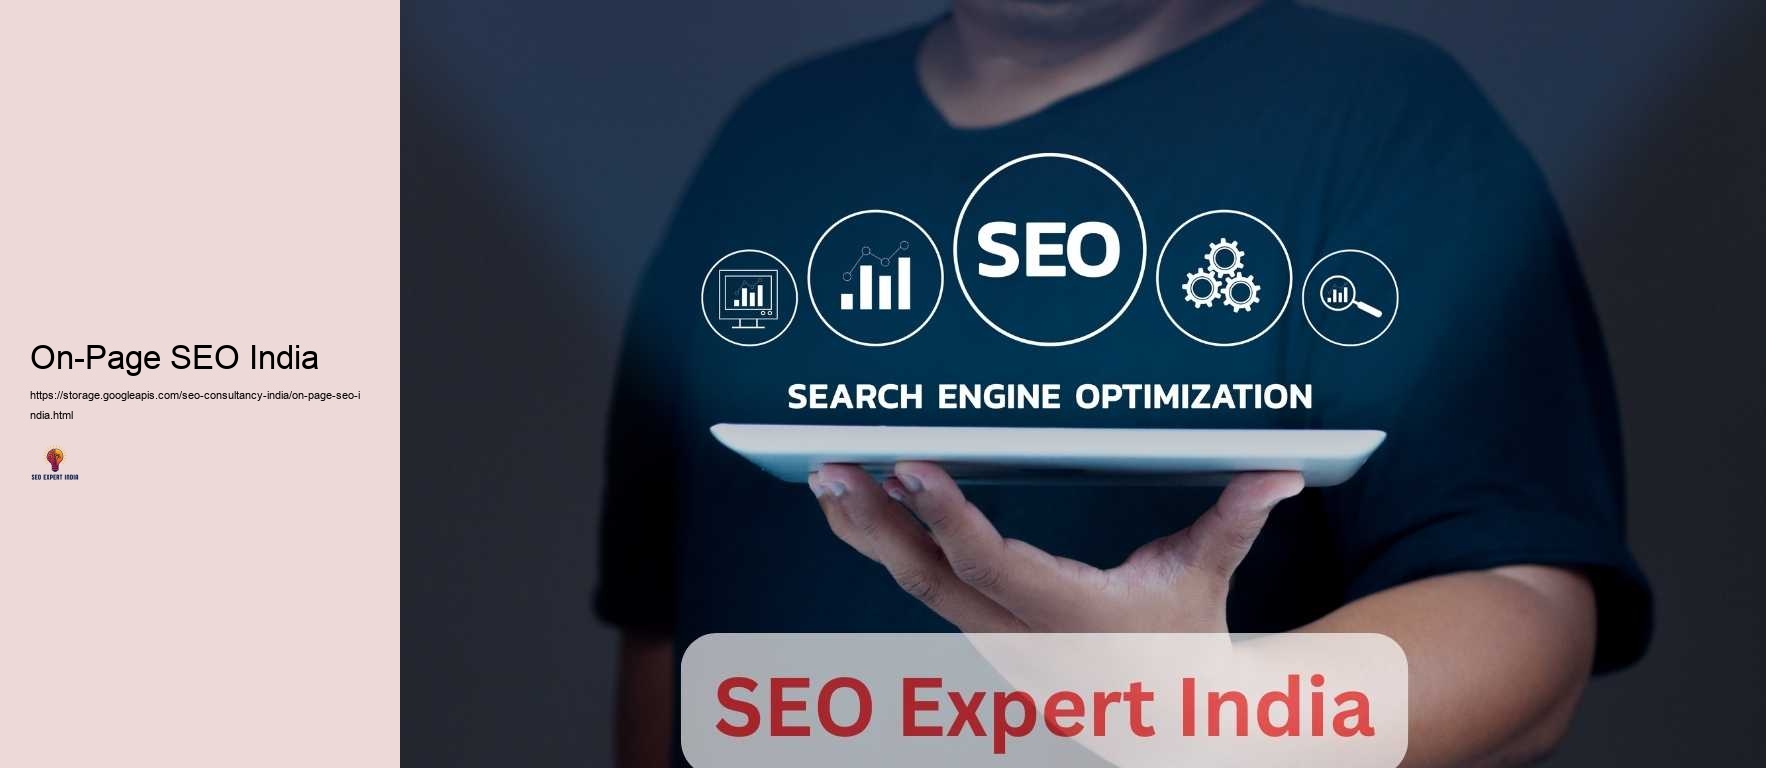 On-Page SEO India